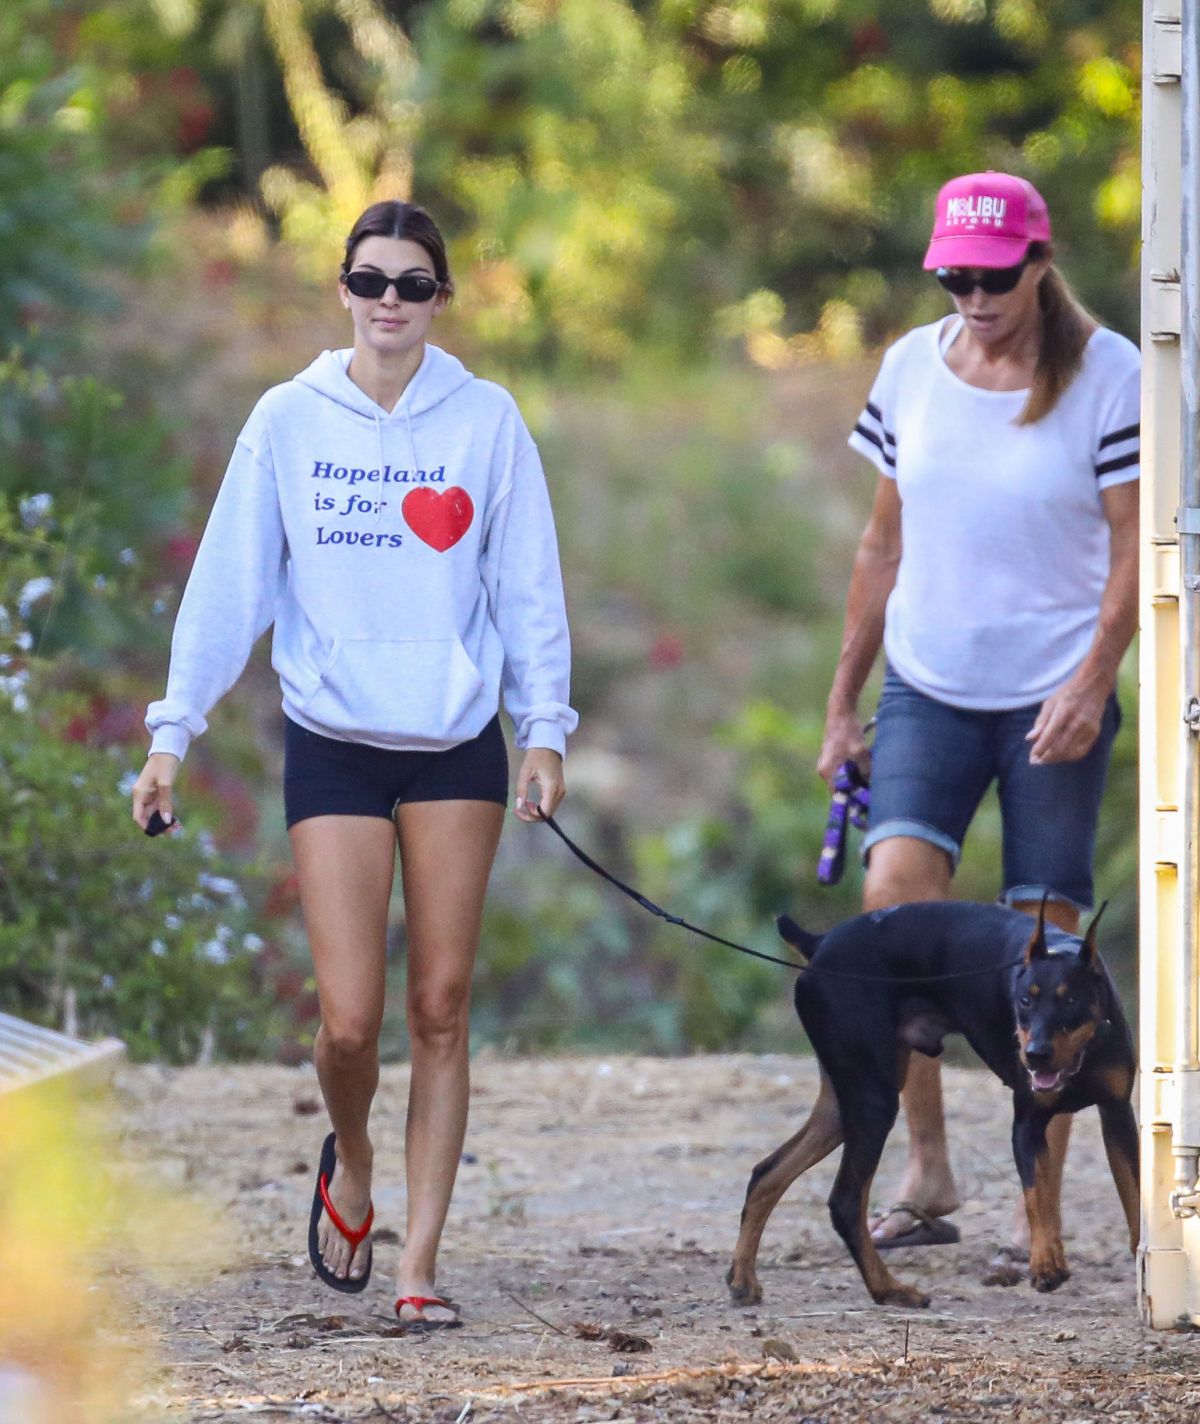 kendall-jenner-out-hiking-with-her-dad-caitlyn-jenner-in-malibu-08-01-2020-1.jpg